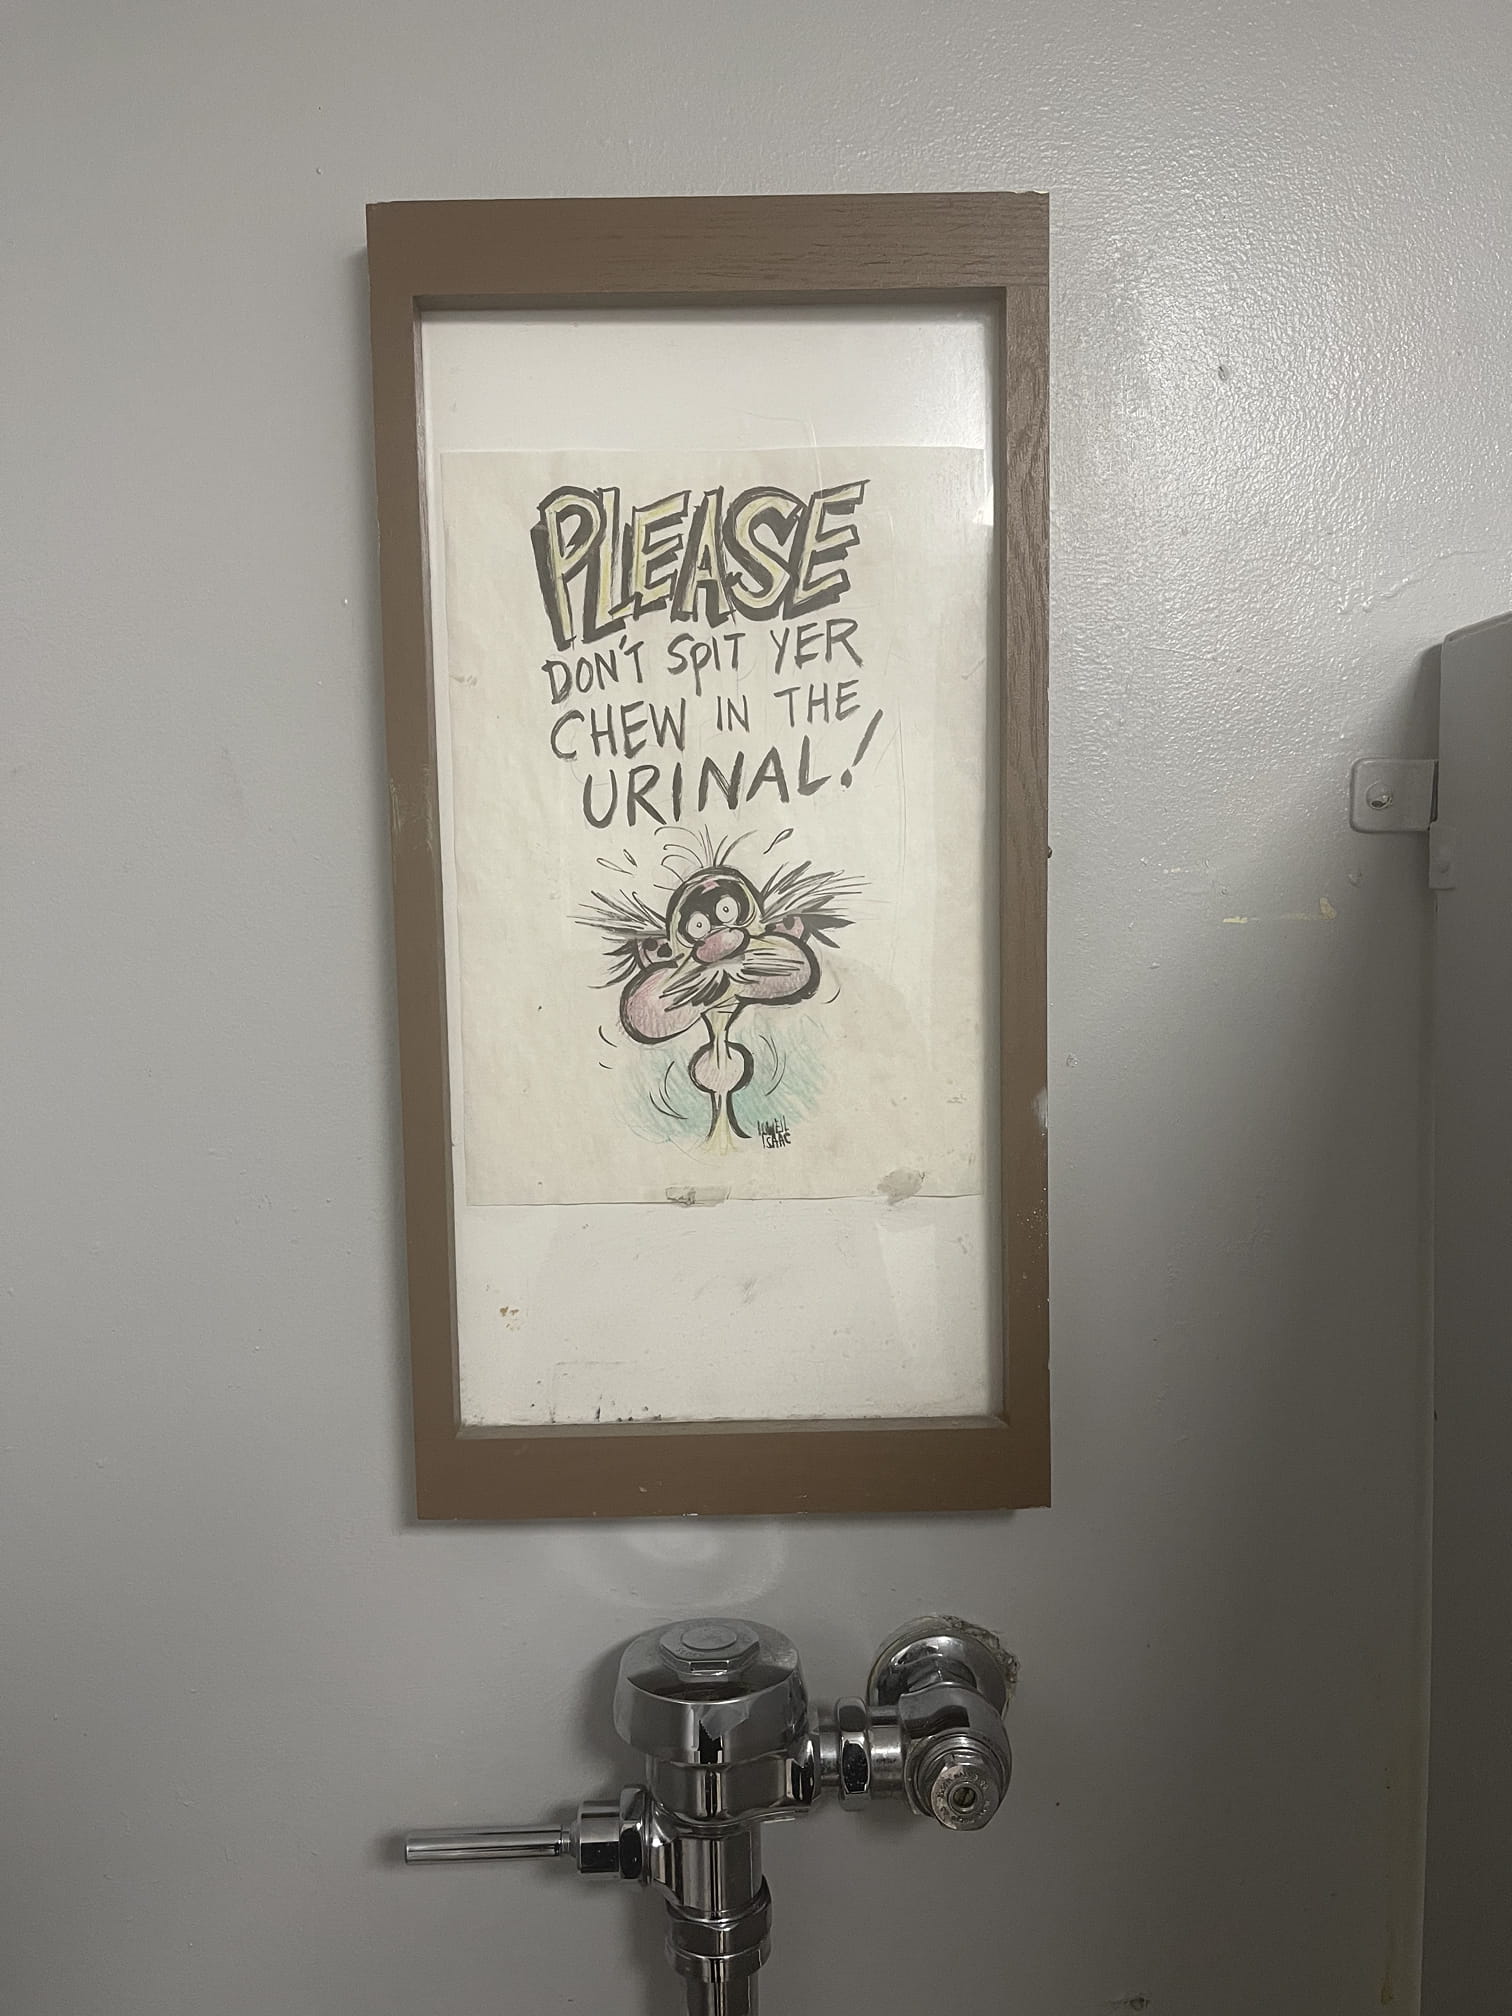 Sign above the urinal steer in